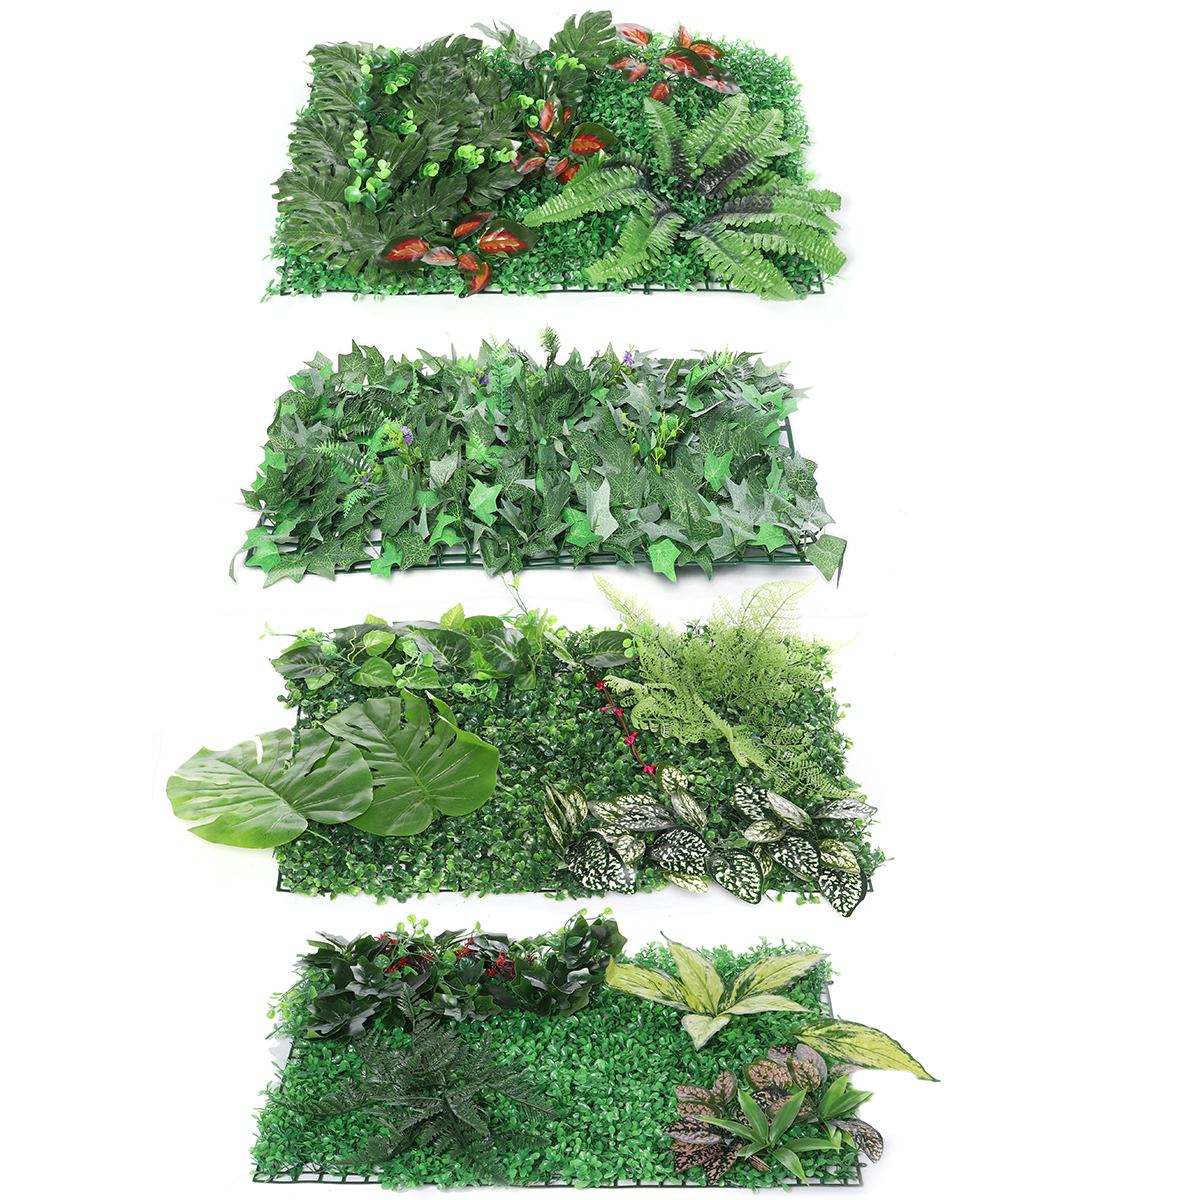 Green-Plant-Wall-Background-Wall-Plastic-Simulation-Plant-Lawn-Wall-1731398-13